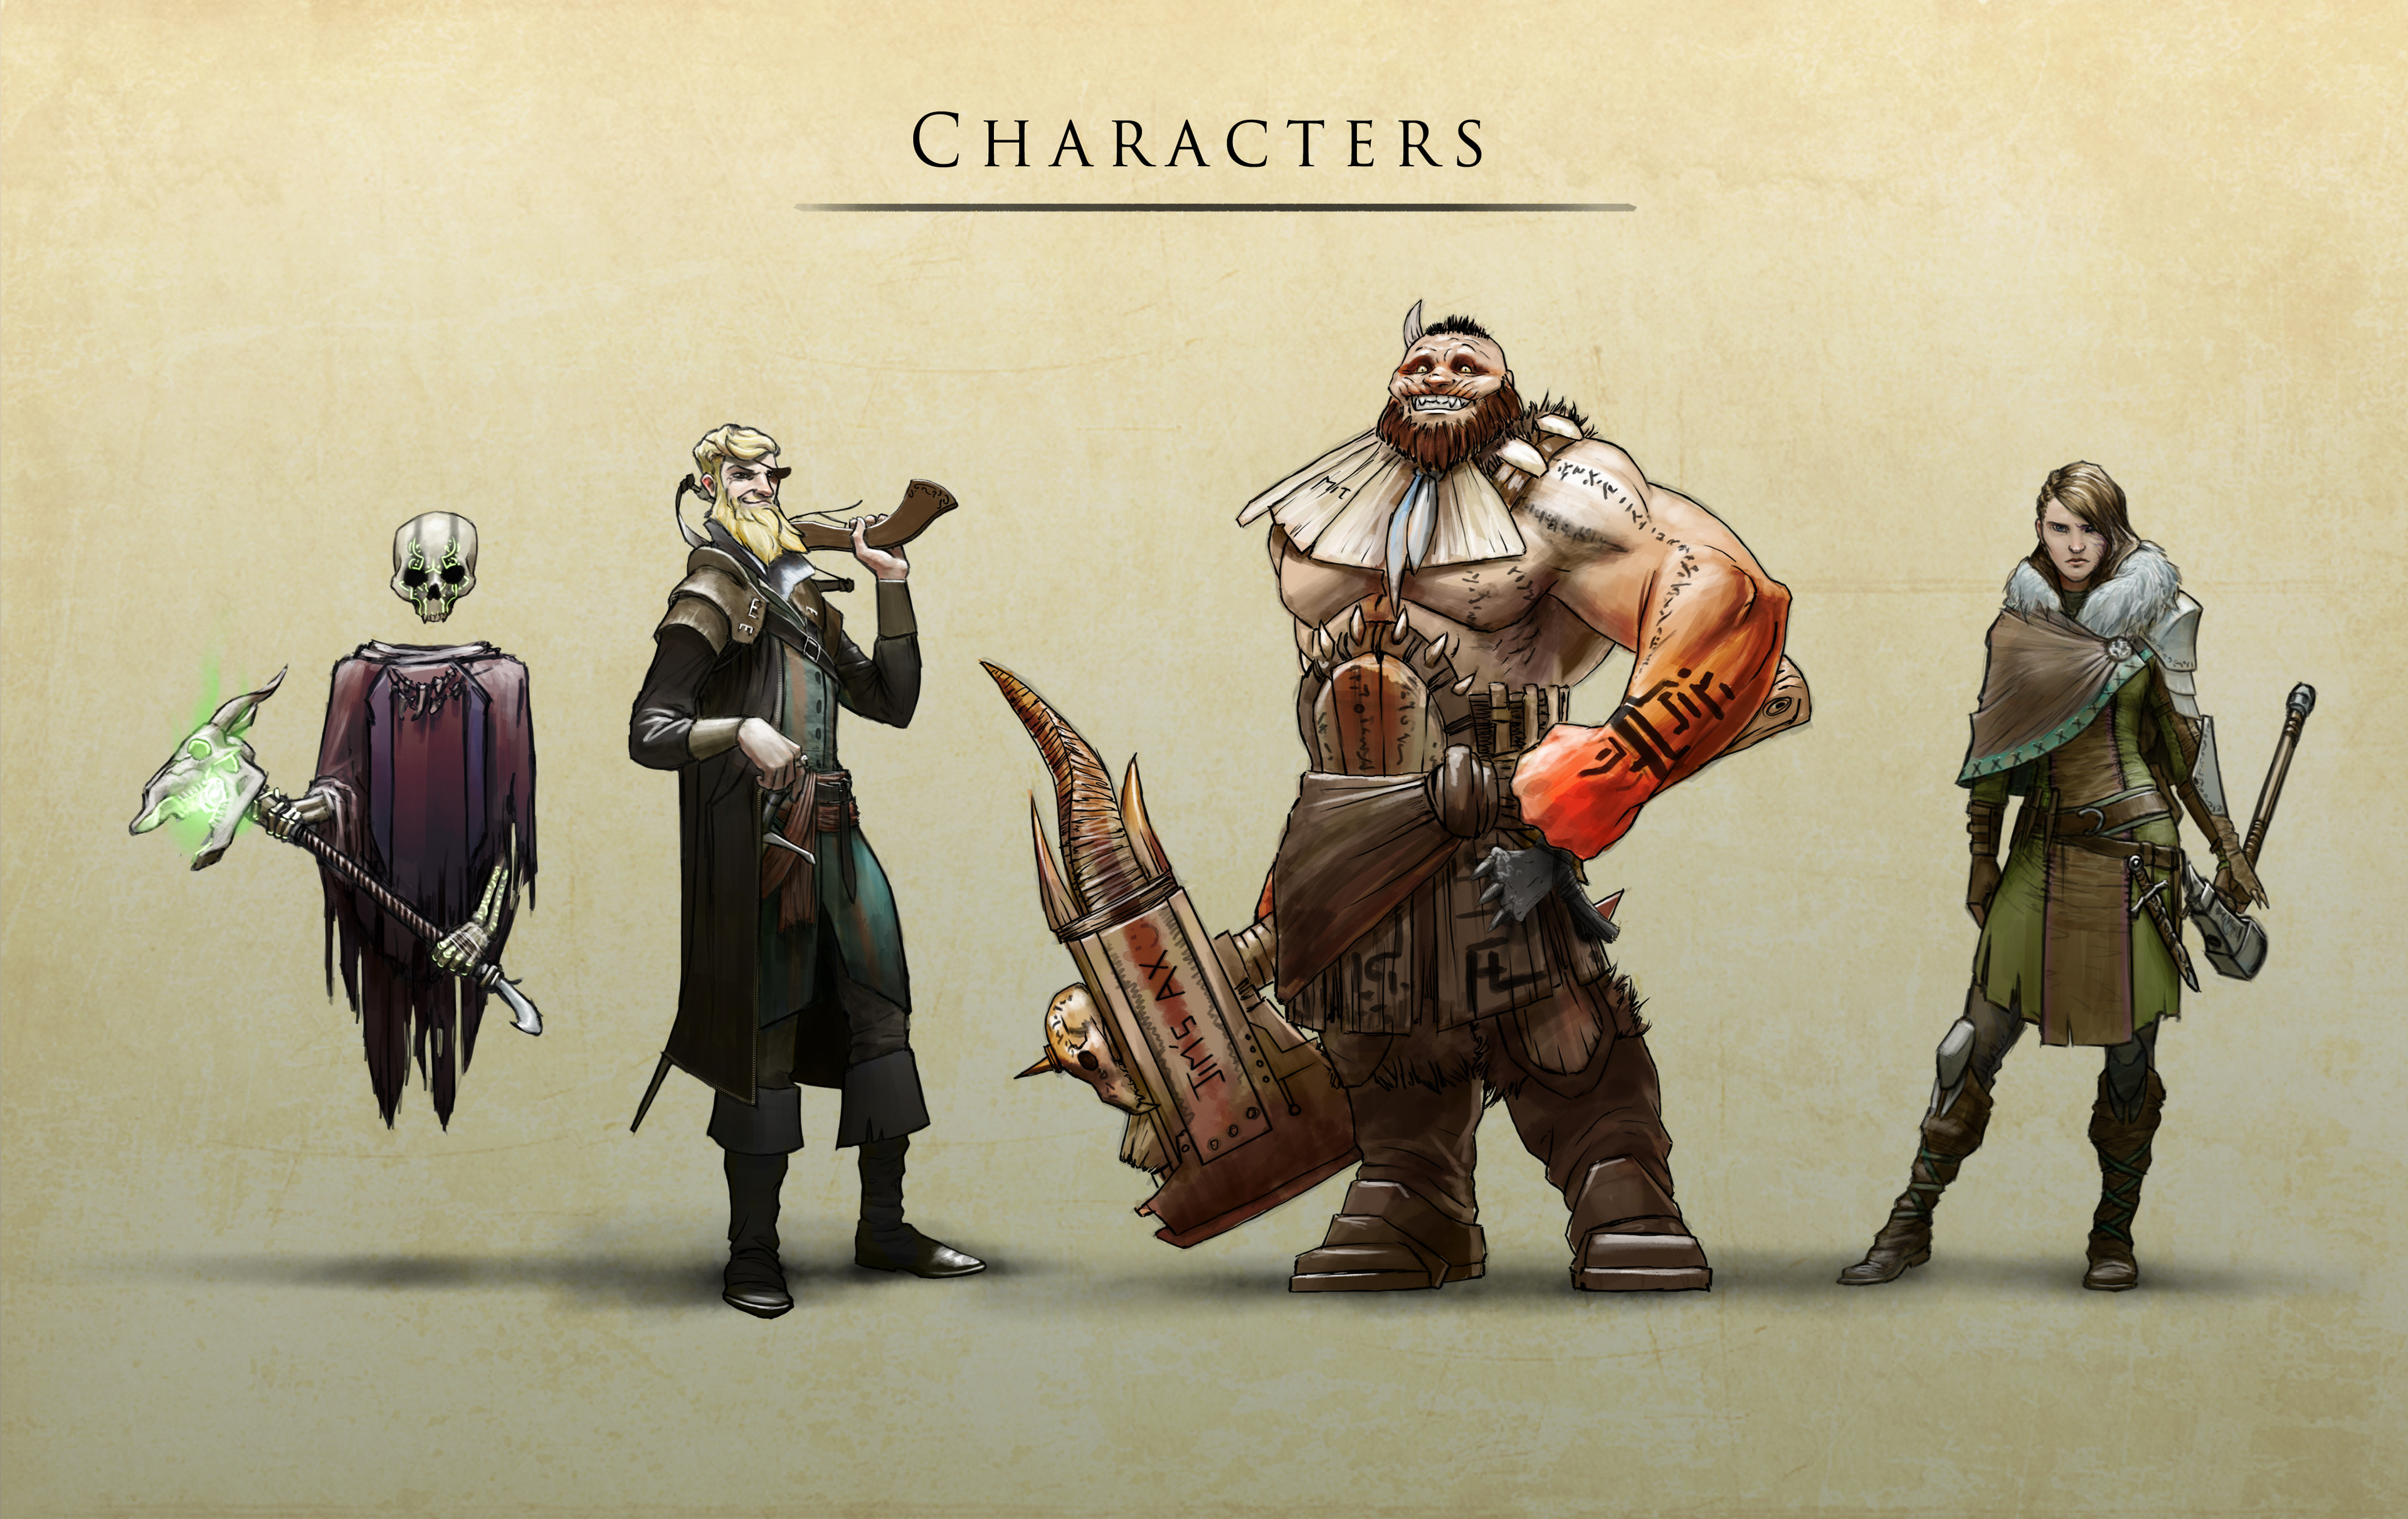 Concept art of characters for game.